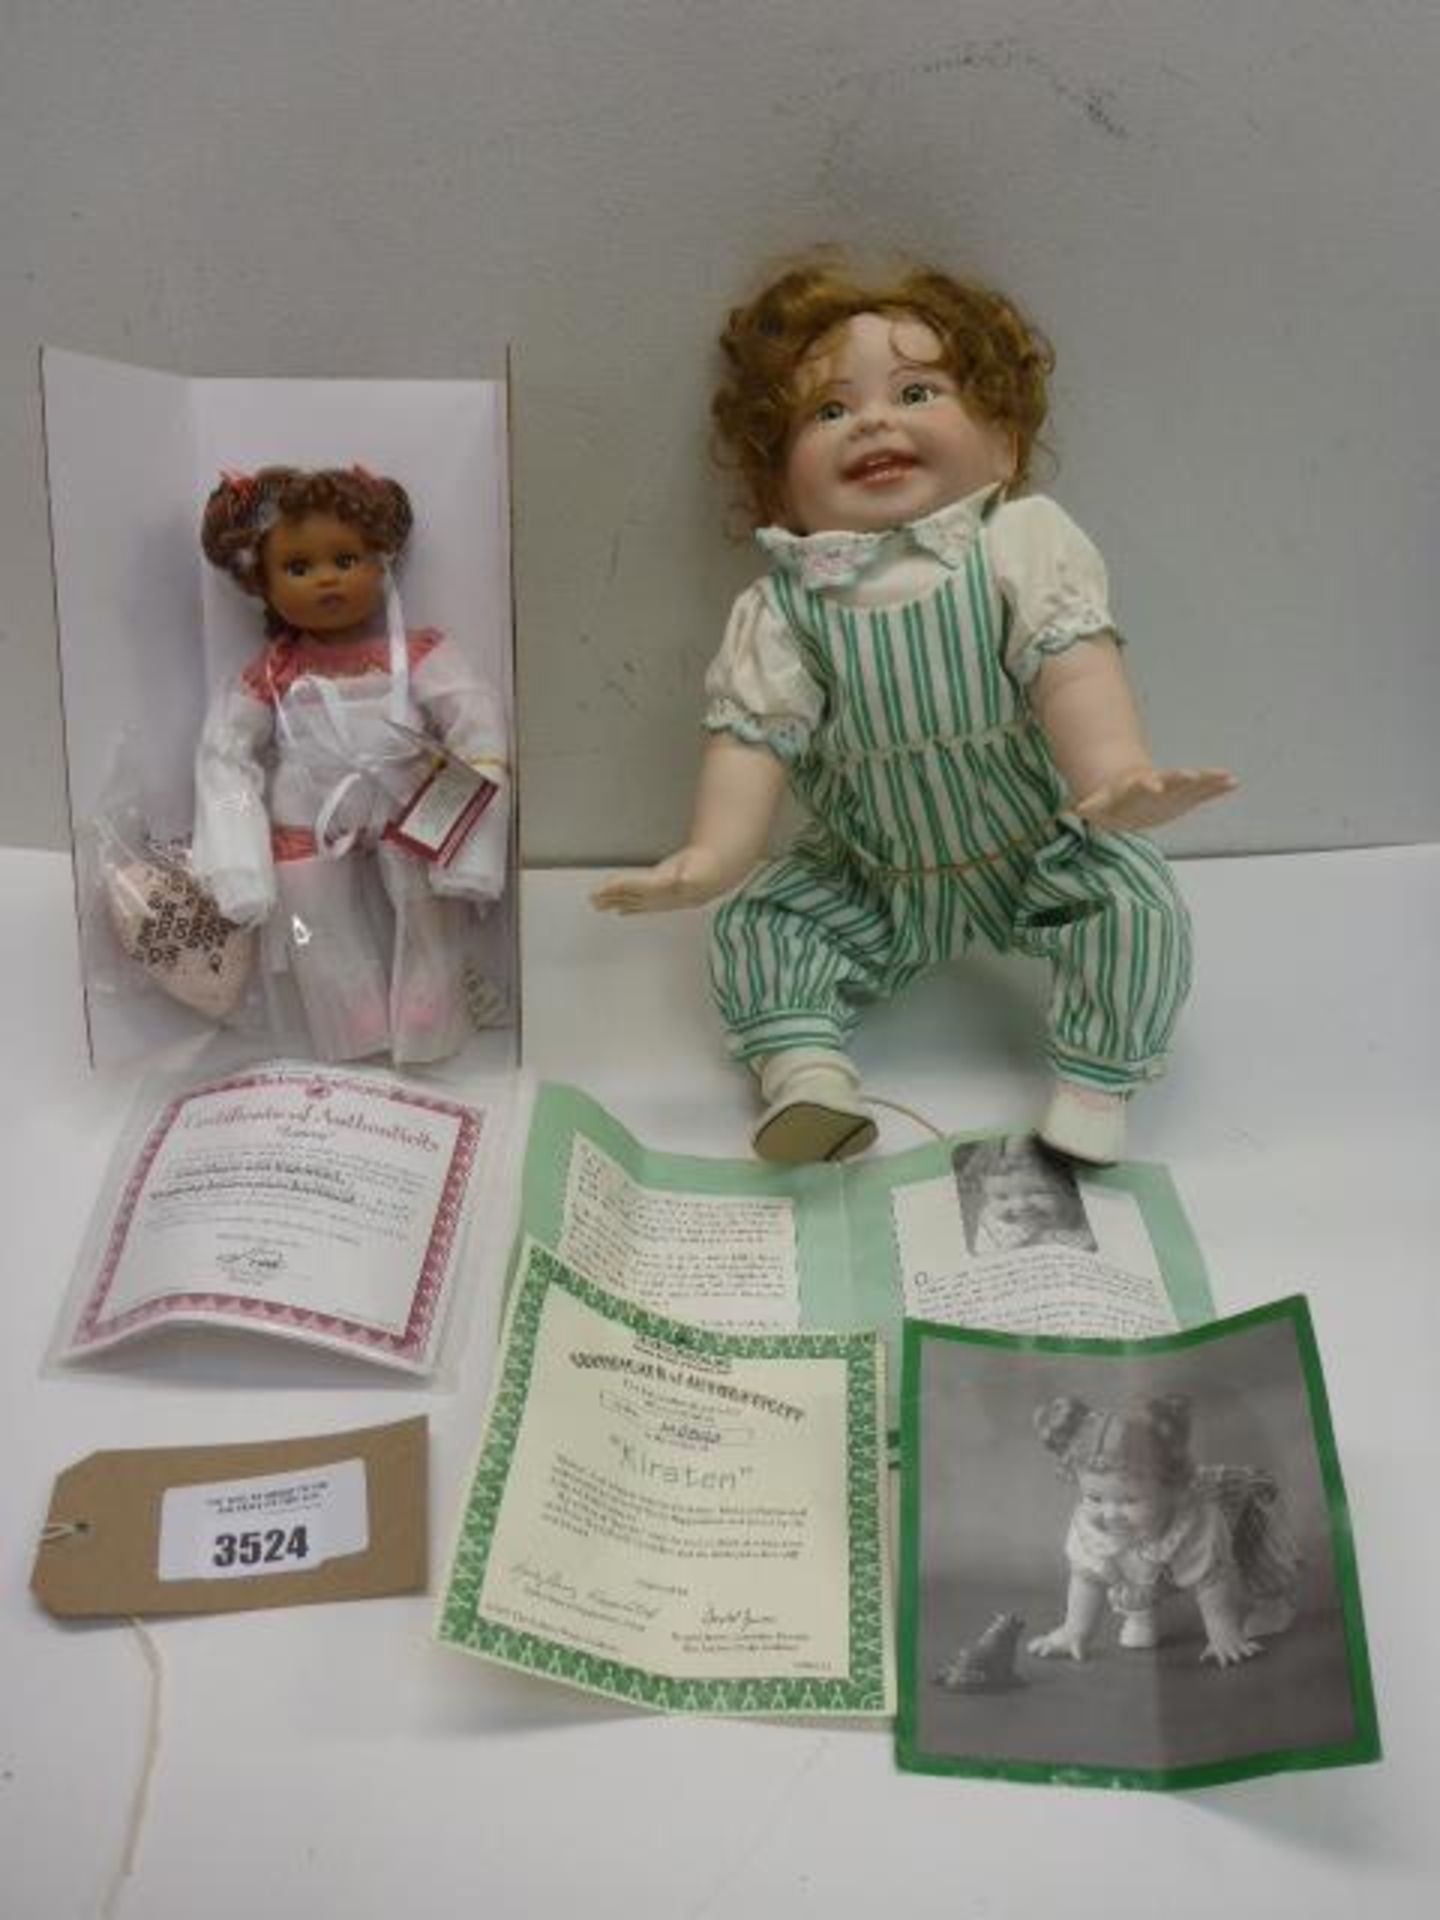 2 collectable dolls : The Ashton Drake Galleries 'Kirsten' doll No. M0542 and 'Laura' doll (both